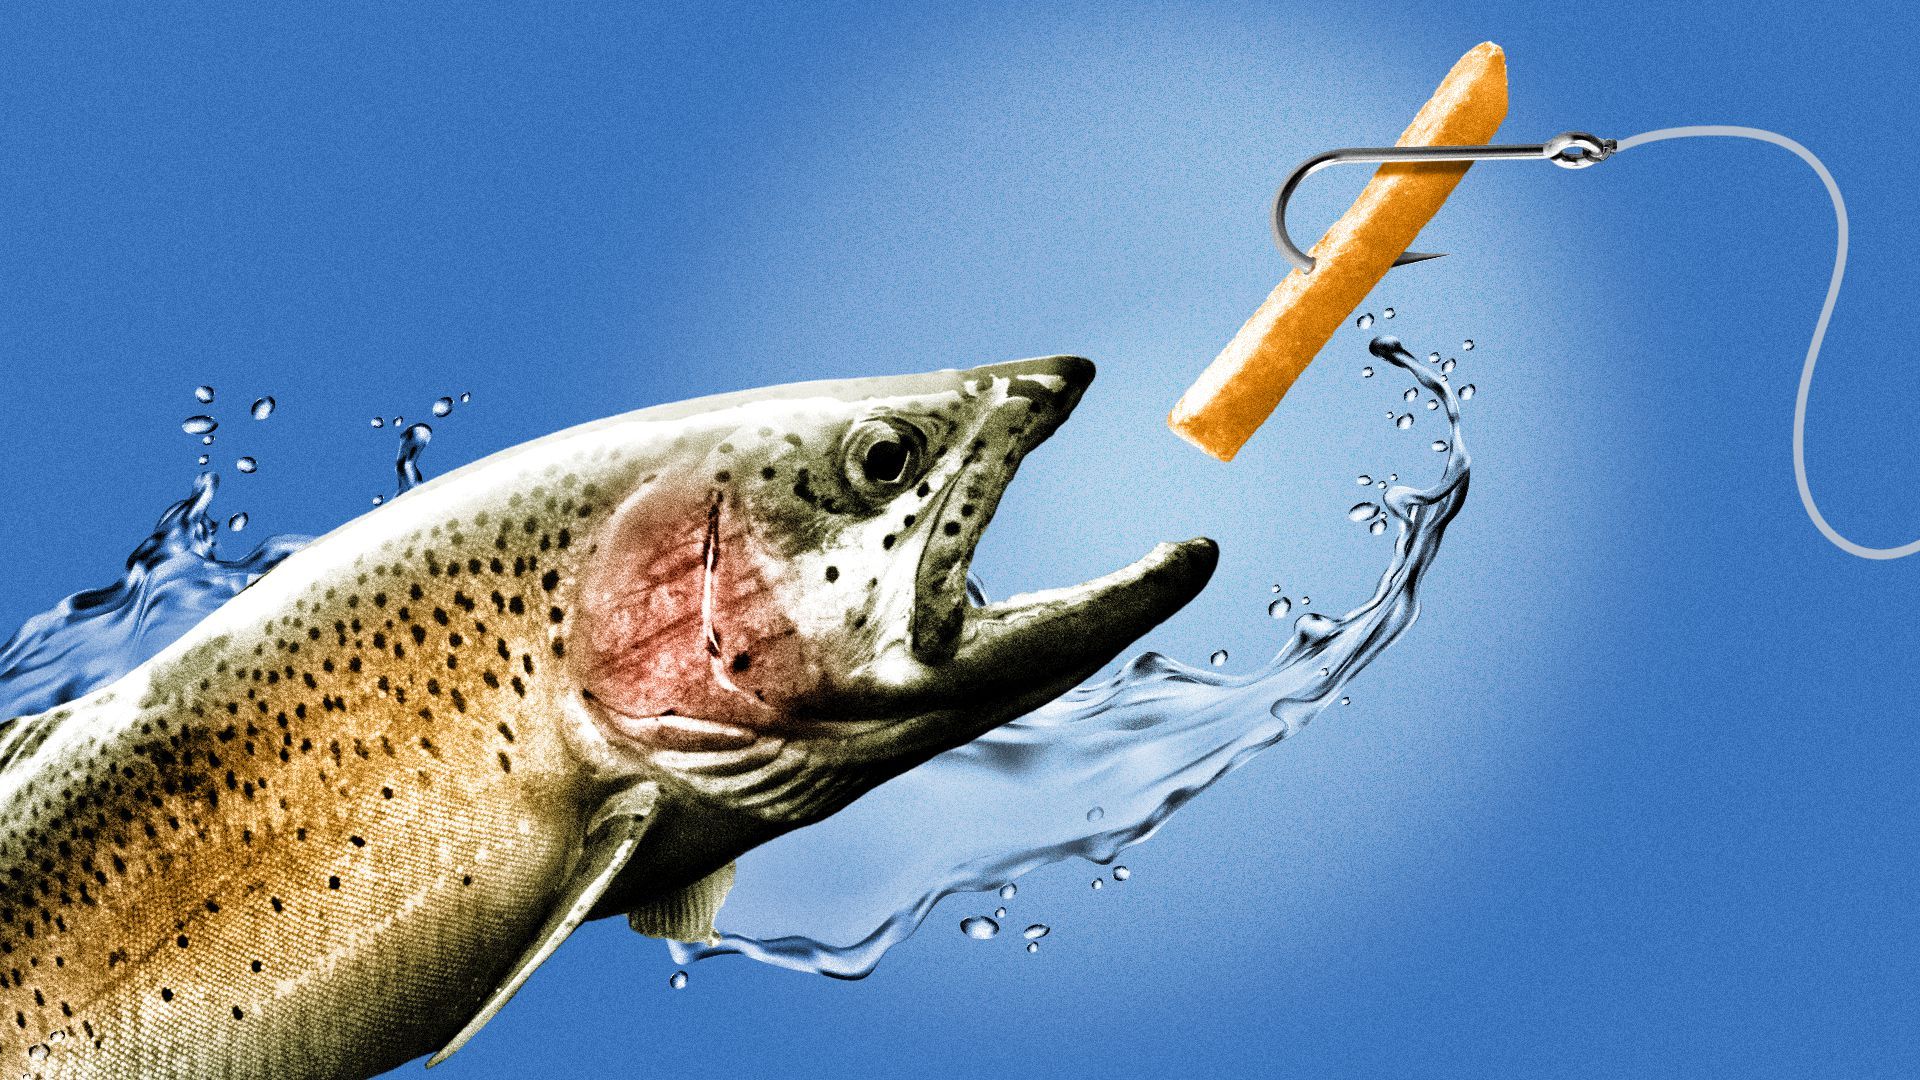 Illustration of a cutthroat trout leaping towards a french fry on a fishing hook.